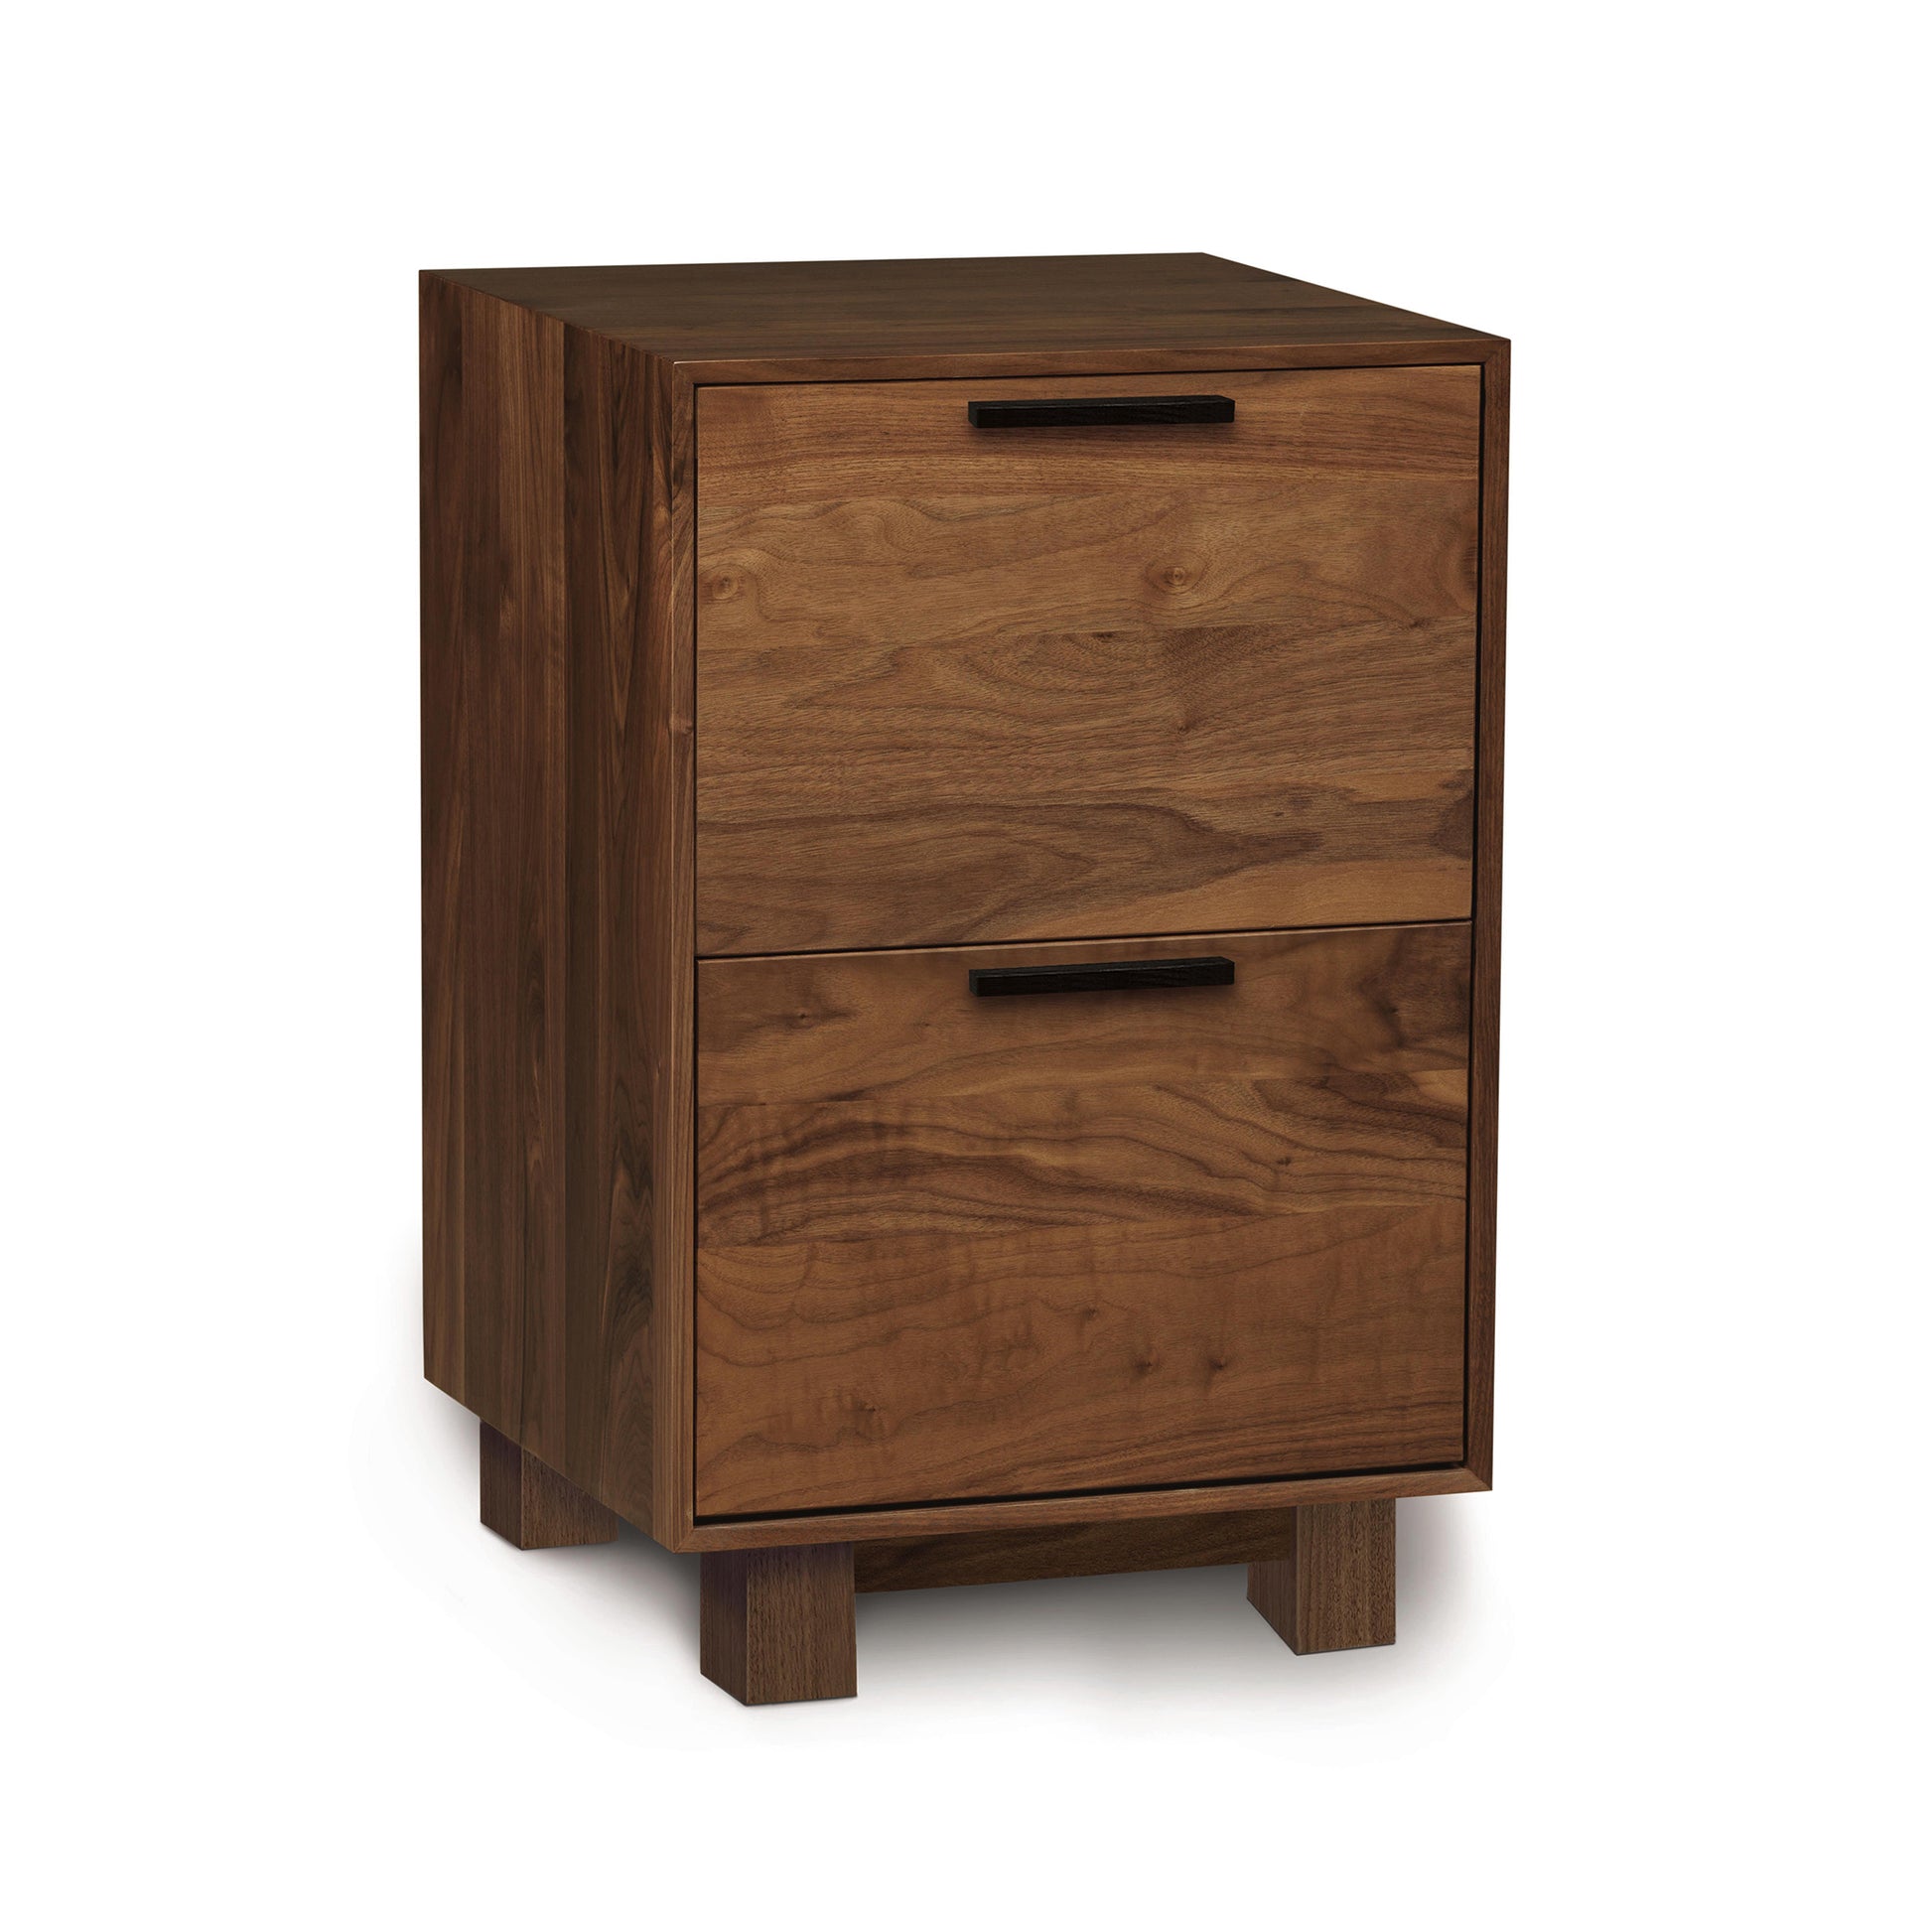 A small modern office Linear Narrow File Cabinet made of wood with two drawers by Copeland Furniture.